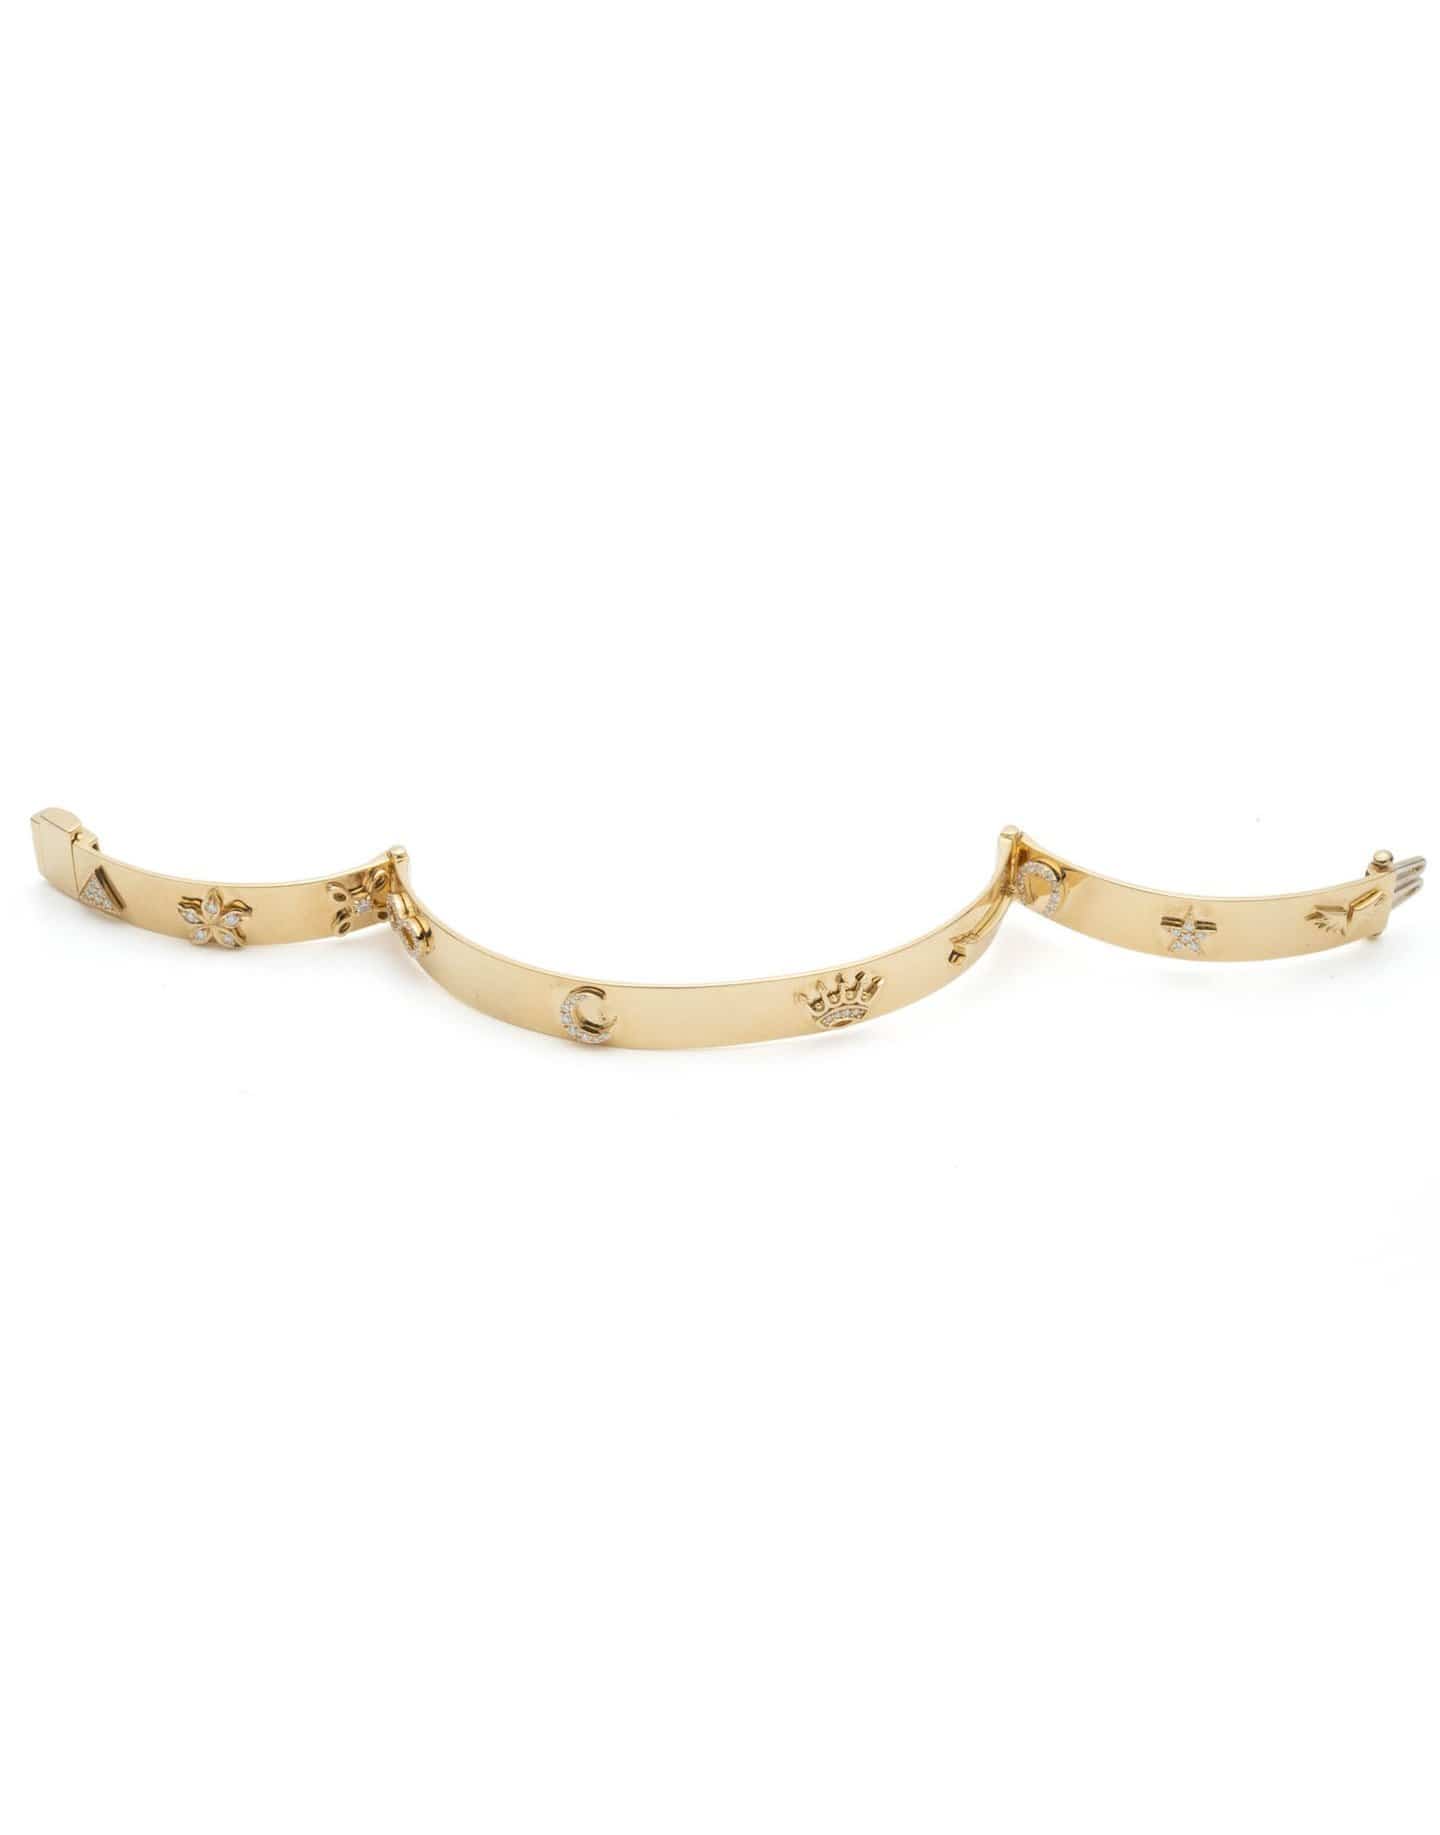 FOUNDRAE-Triptych Bangle-YELLOW GOLD